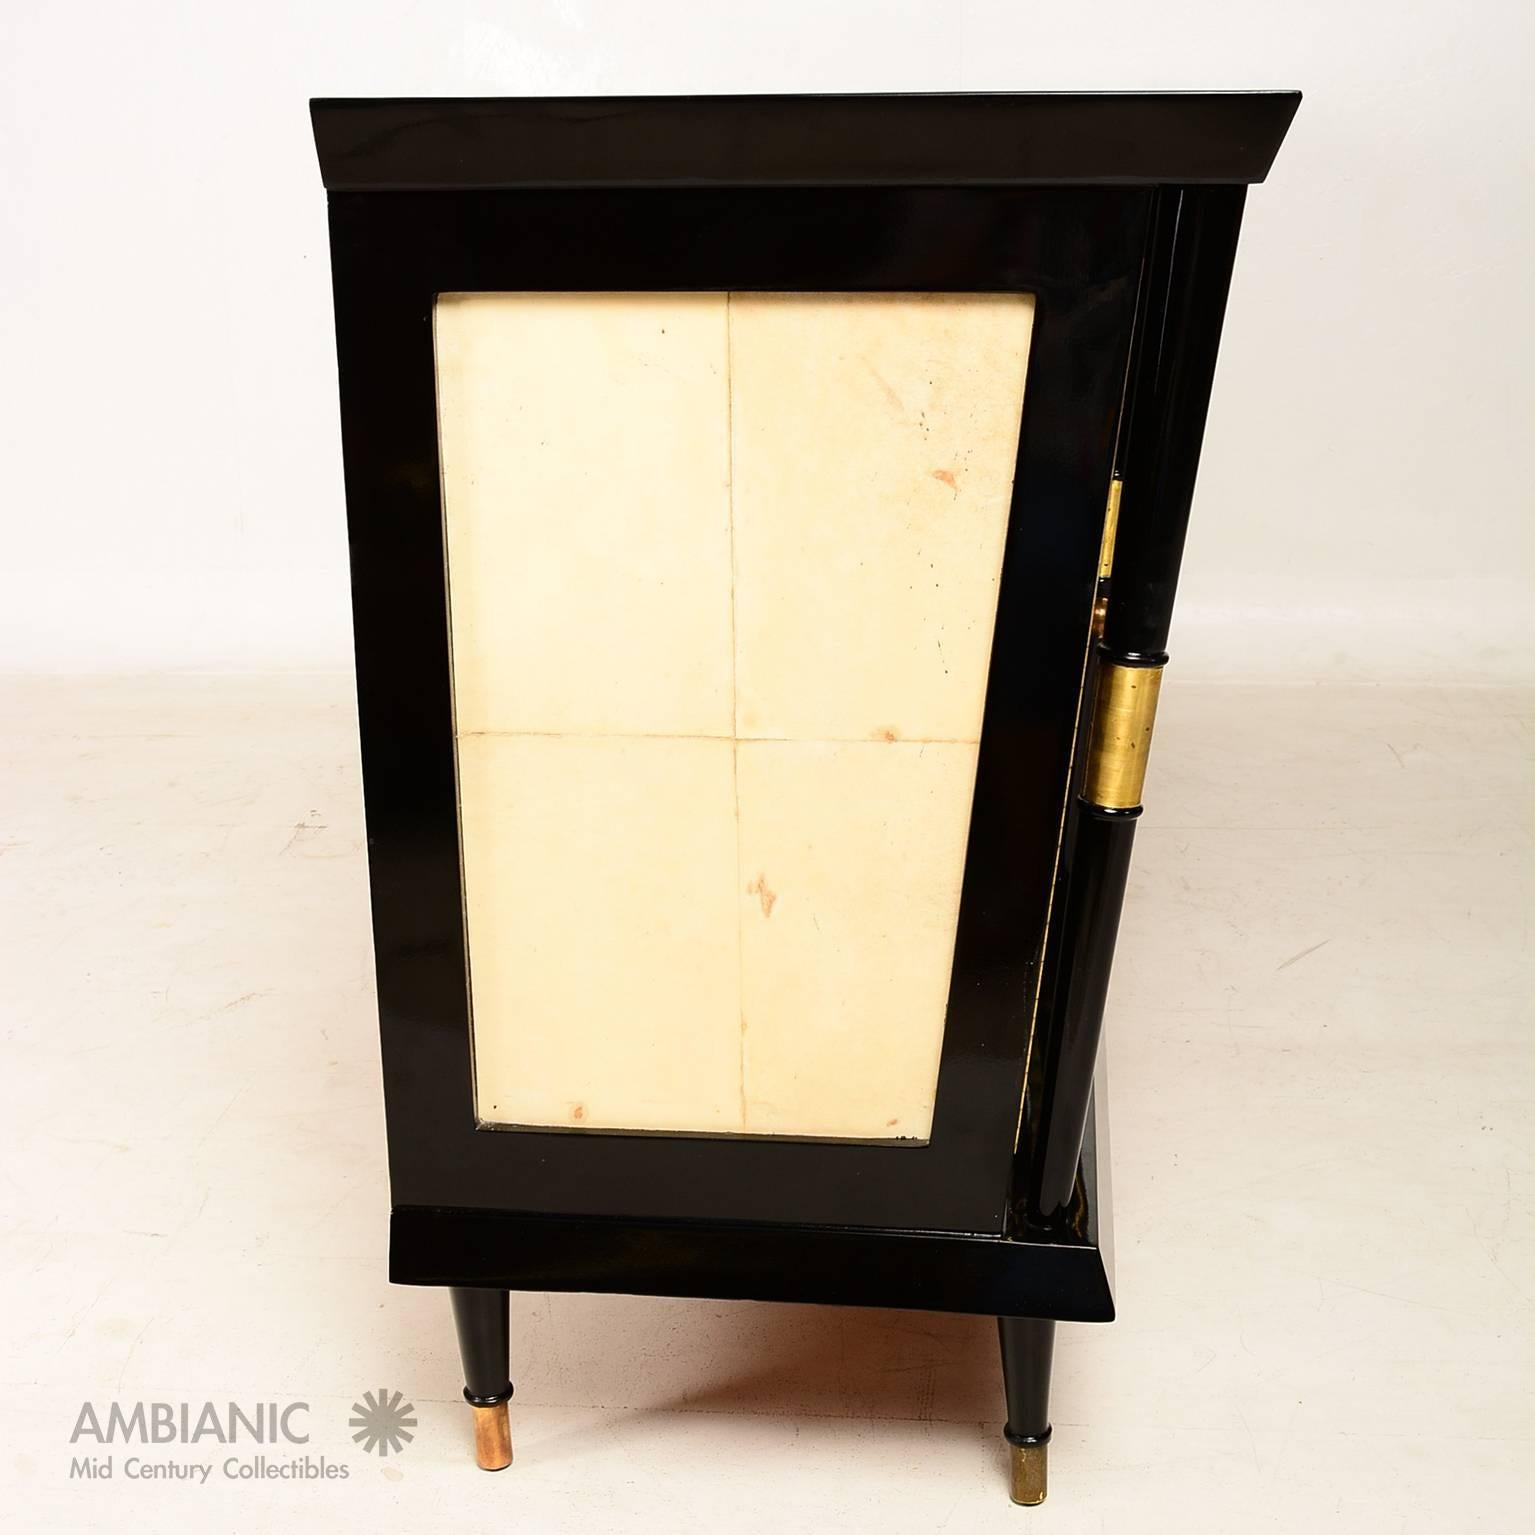 Lacquered Mexican Modernist Credenza in Black Lacquer with Brass and Goatskin Accents